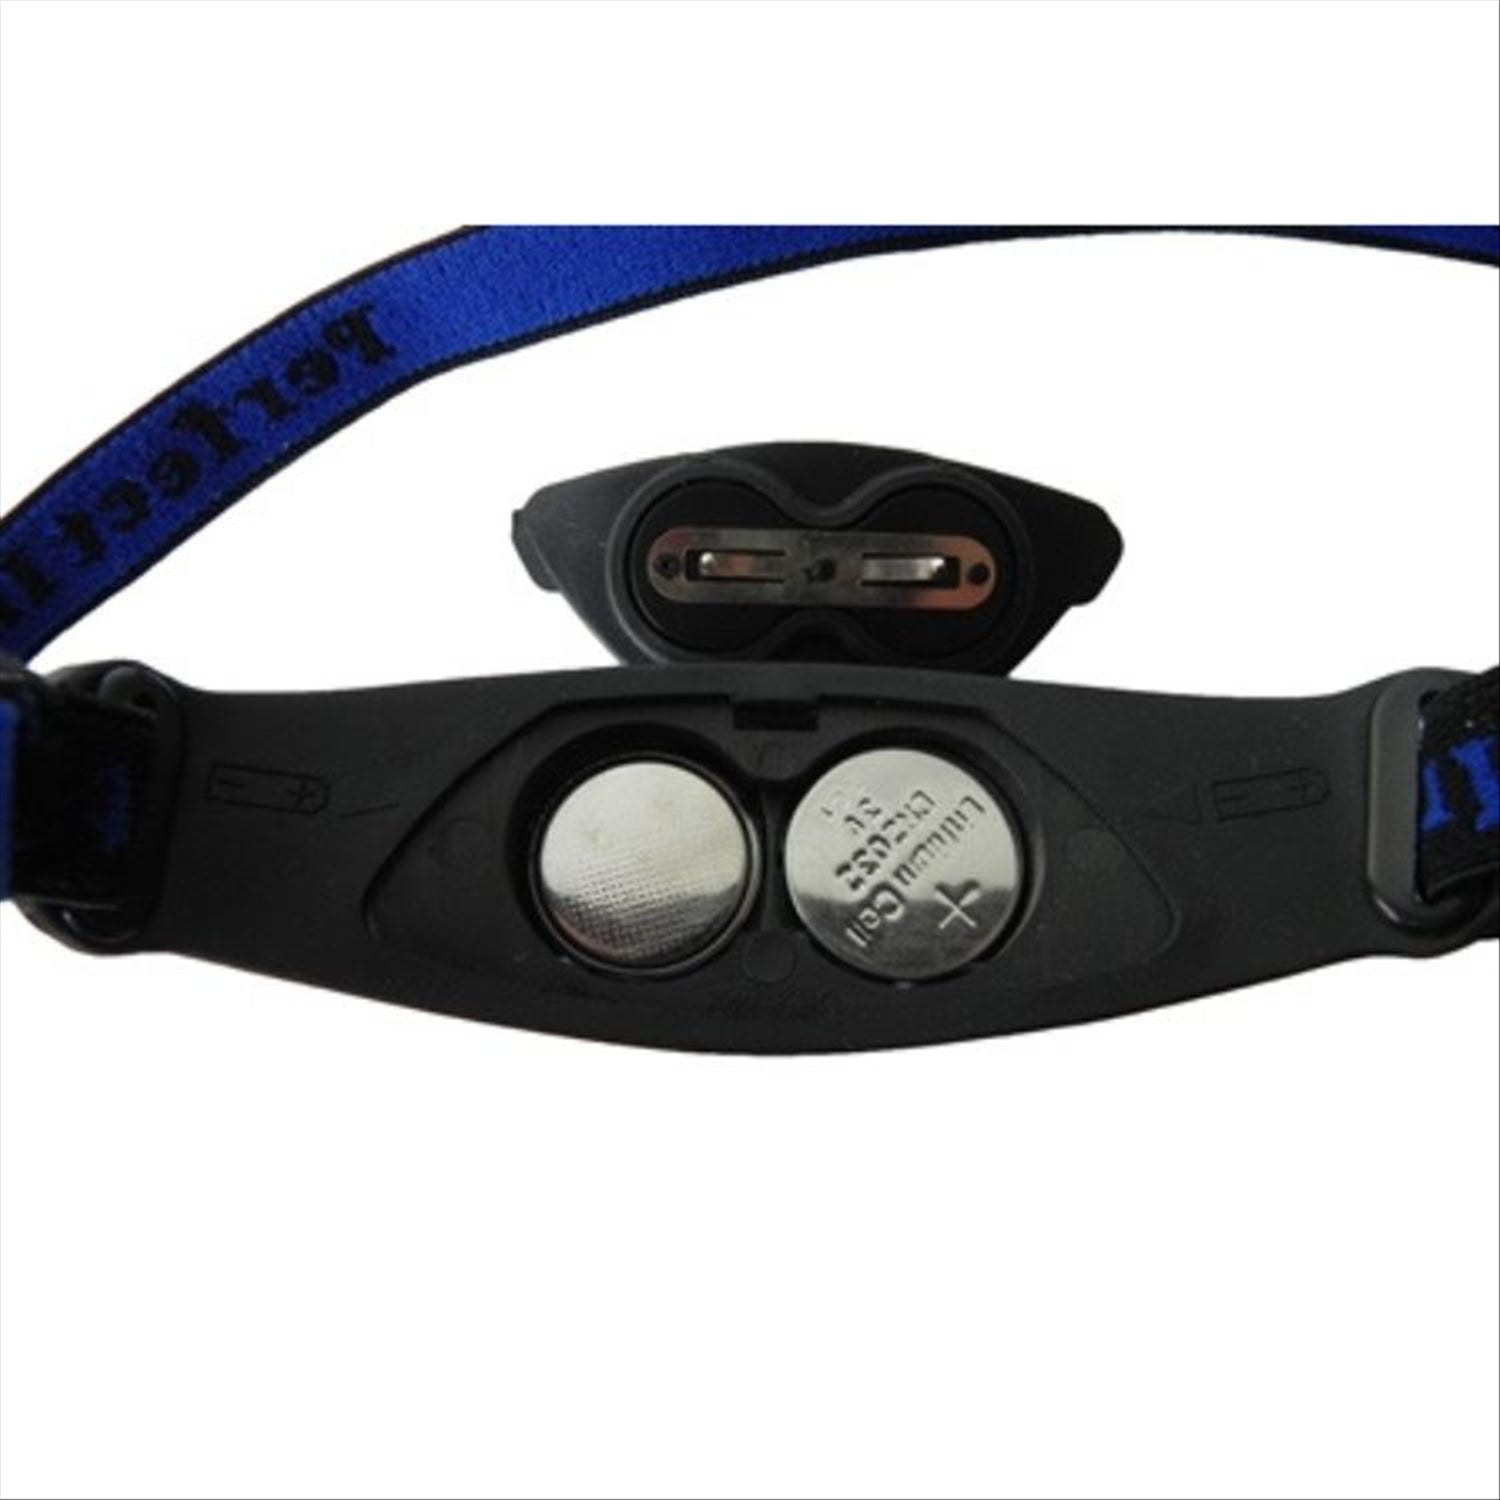 PERFECT IMAGE Perfect Image Headlamp 180 Lumens with Batteries